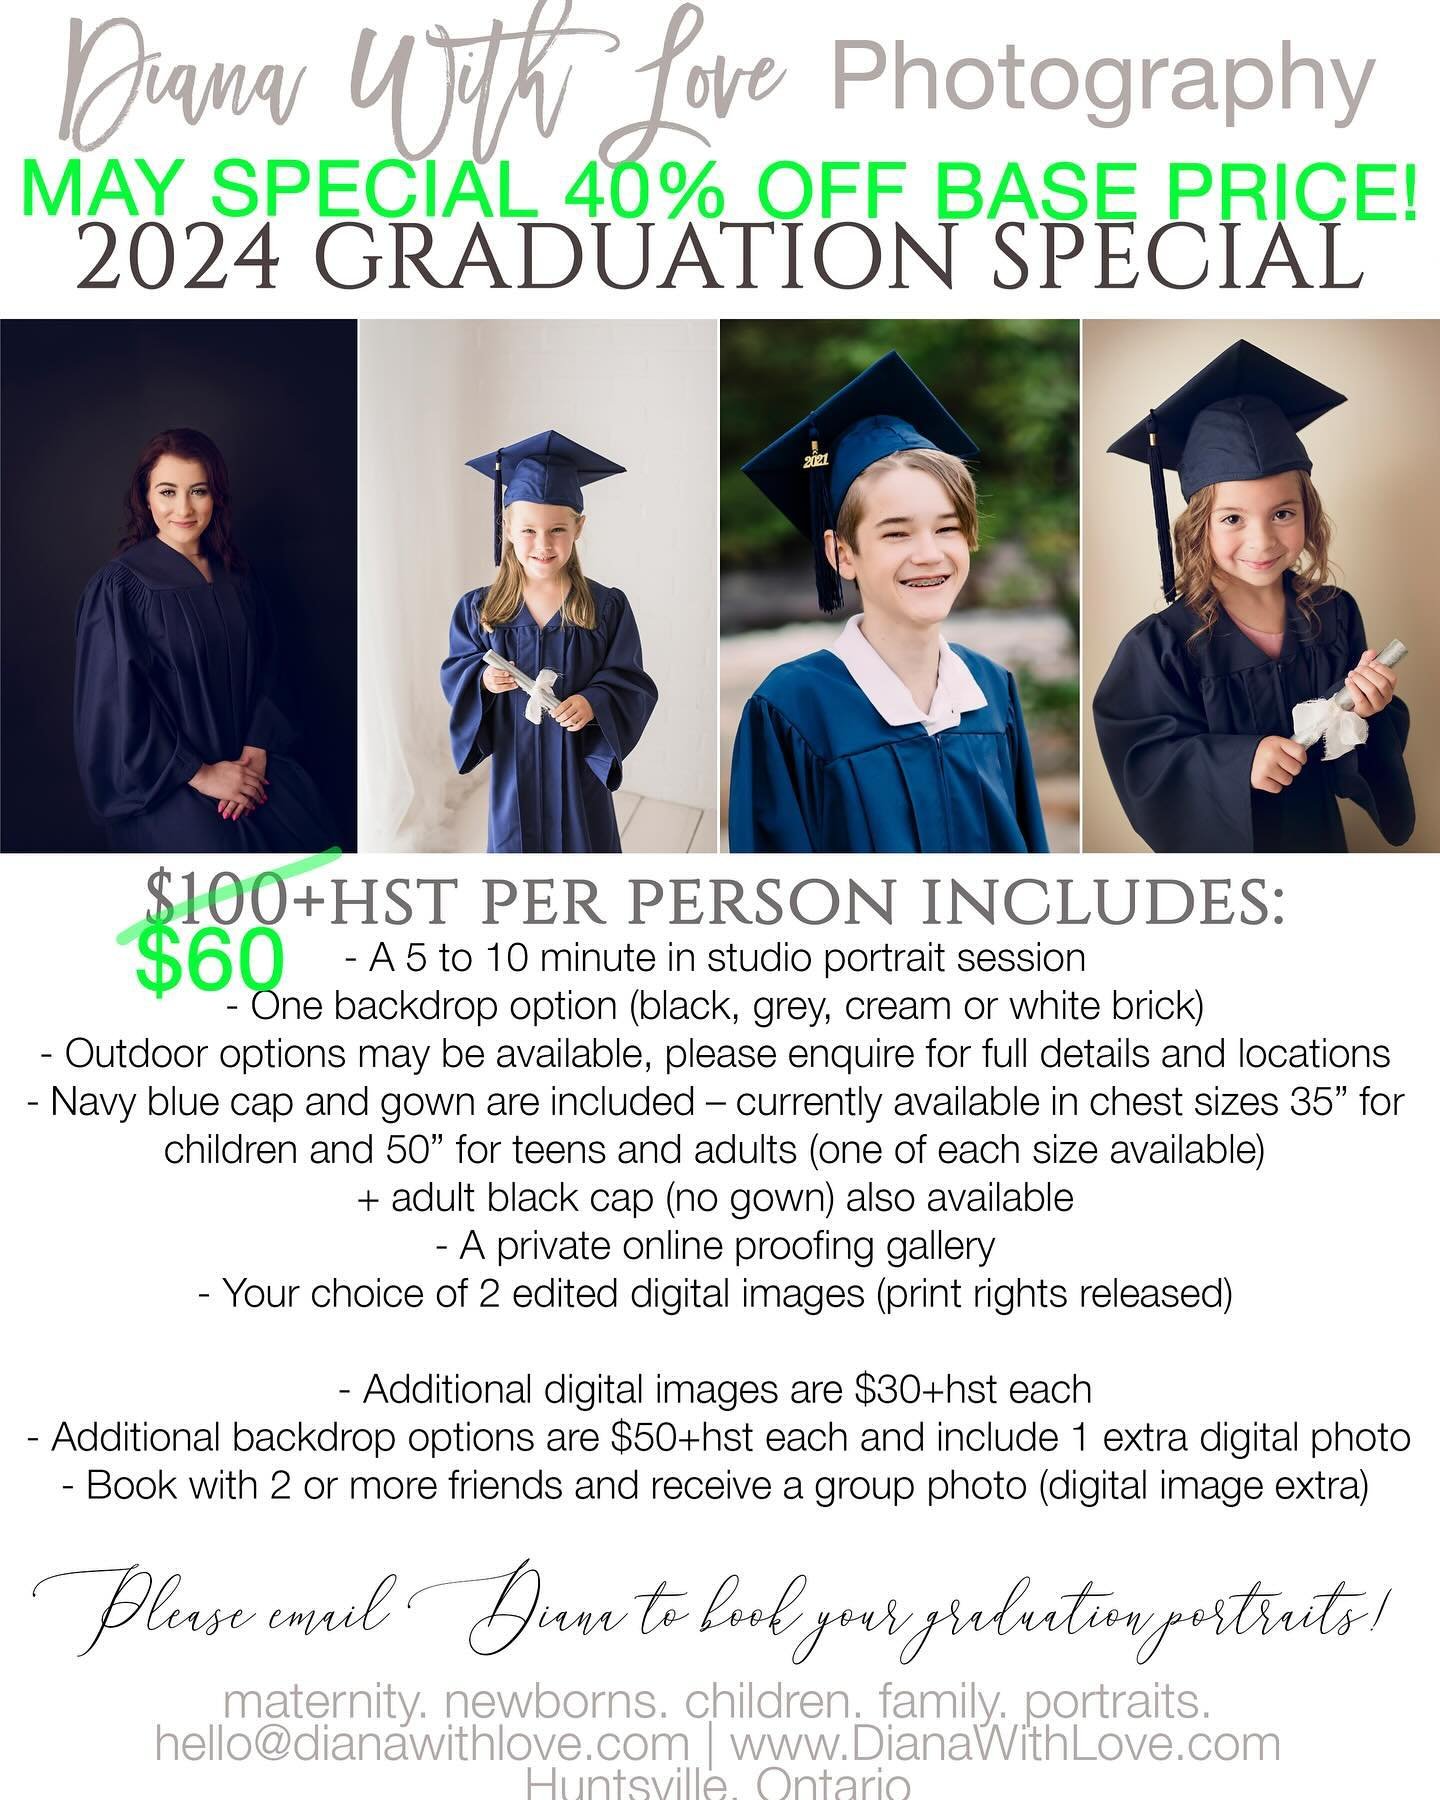 MAY SPECIAL: 40% off Grad Portraits! Looking for a more personalized experience to capture this milestone? I&rsquo;ve got you covered! Book your session this month and receive 40% off your base price!

 These are especially great for kindergarten gra